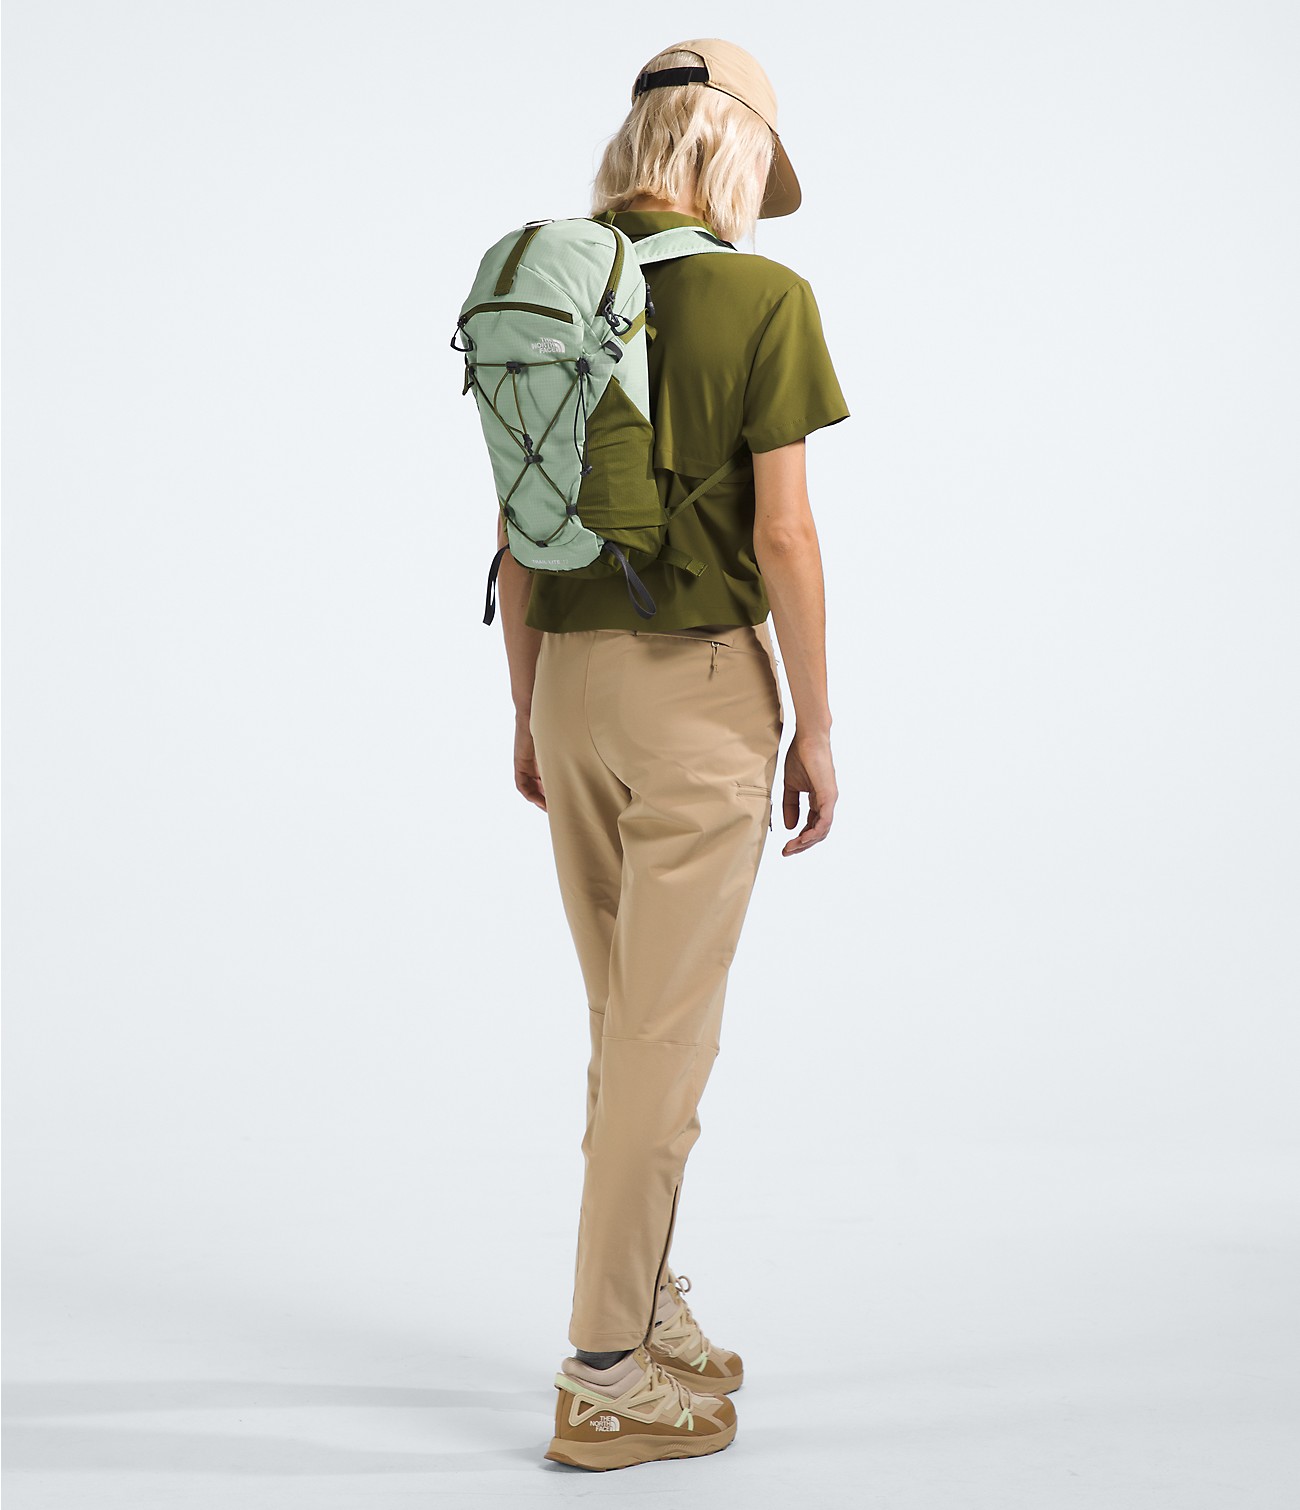 Women’s Trail Lite 12 Backpack | The North Face